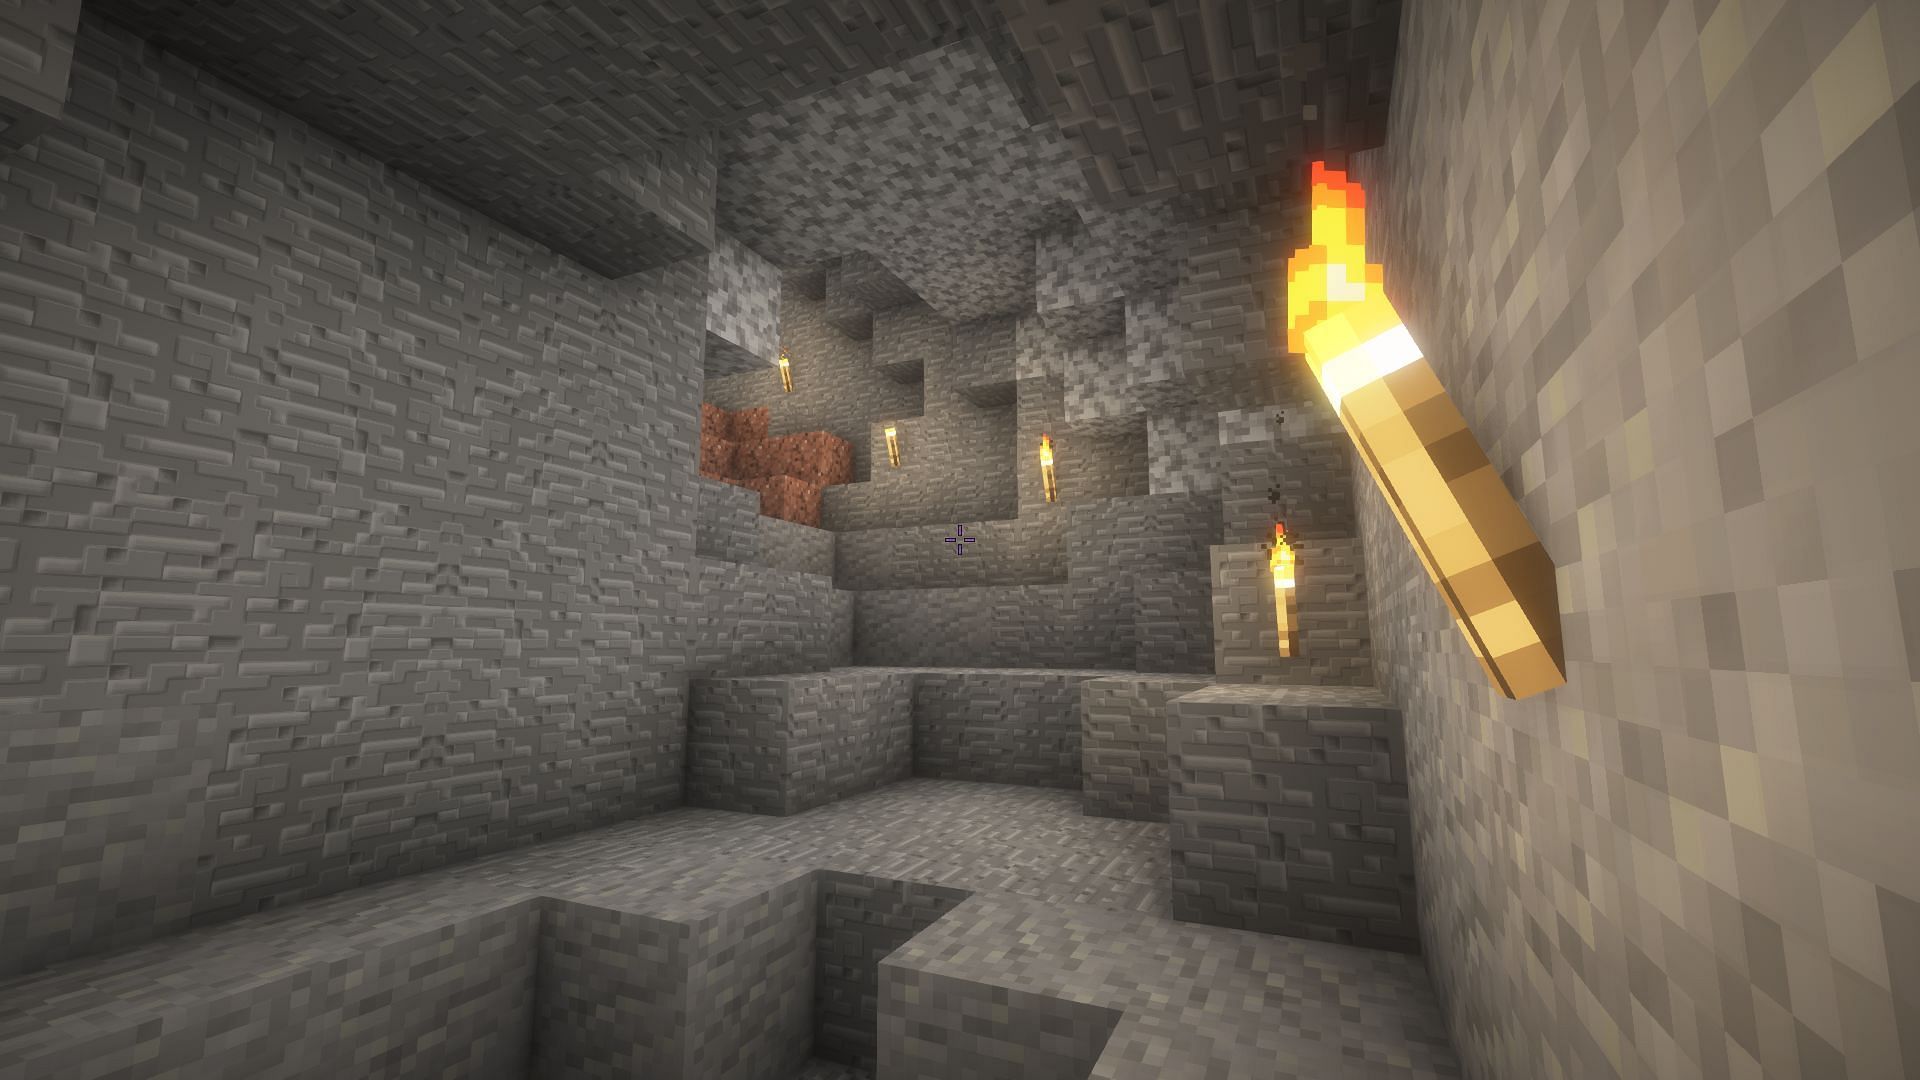 Consistently placing torches can save huge headaches getting lost (Image via Mojang)